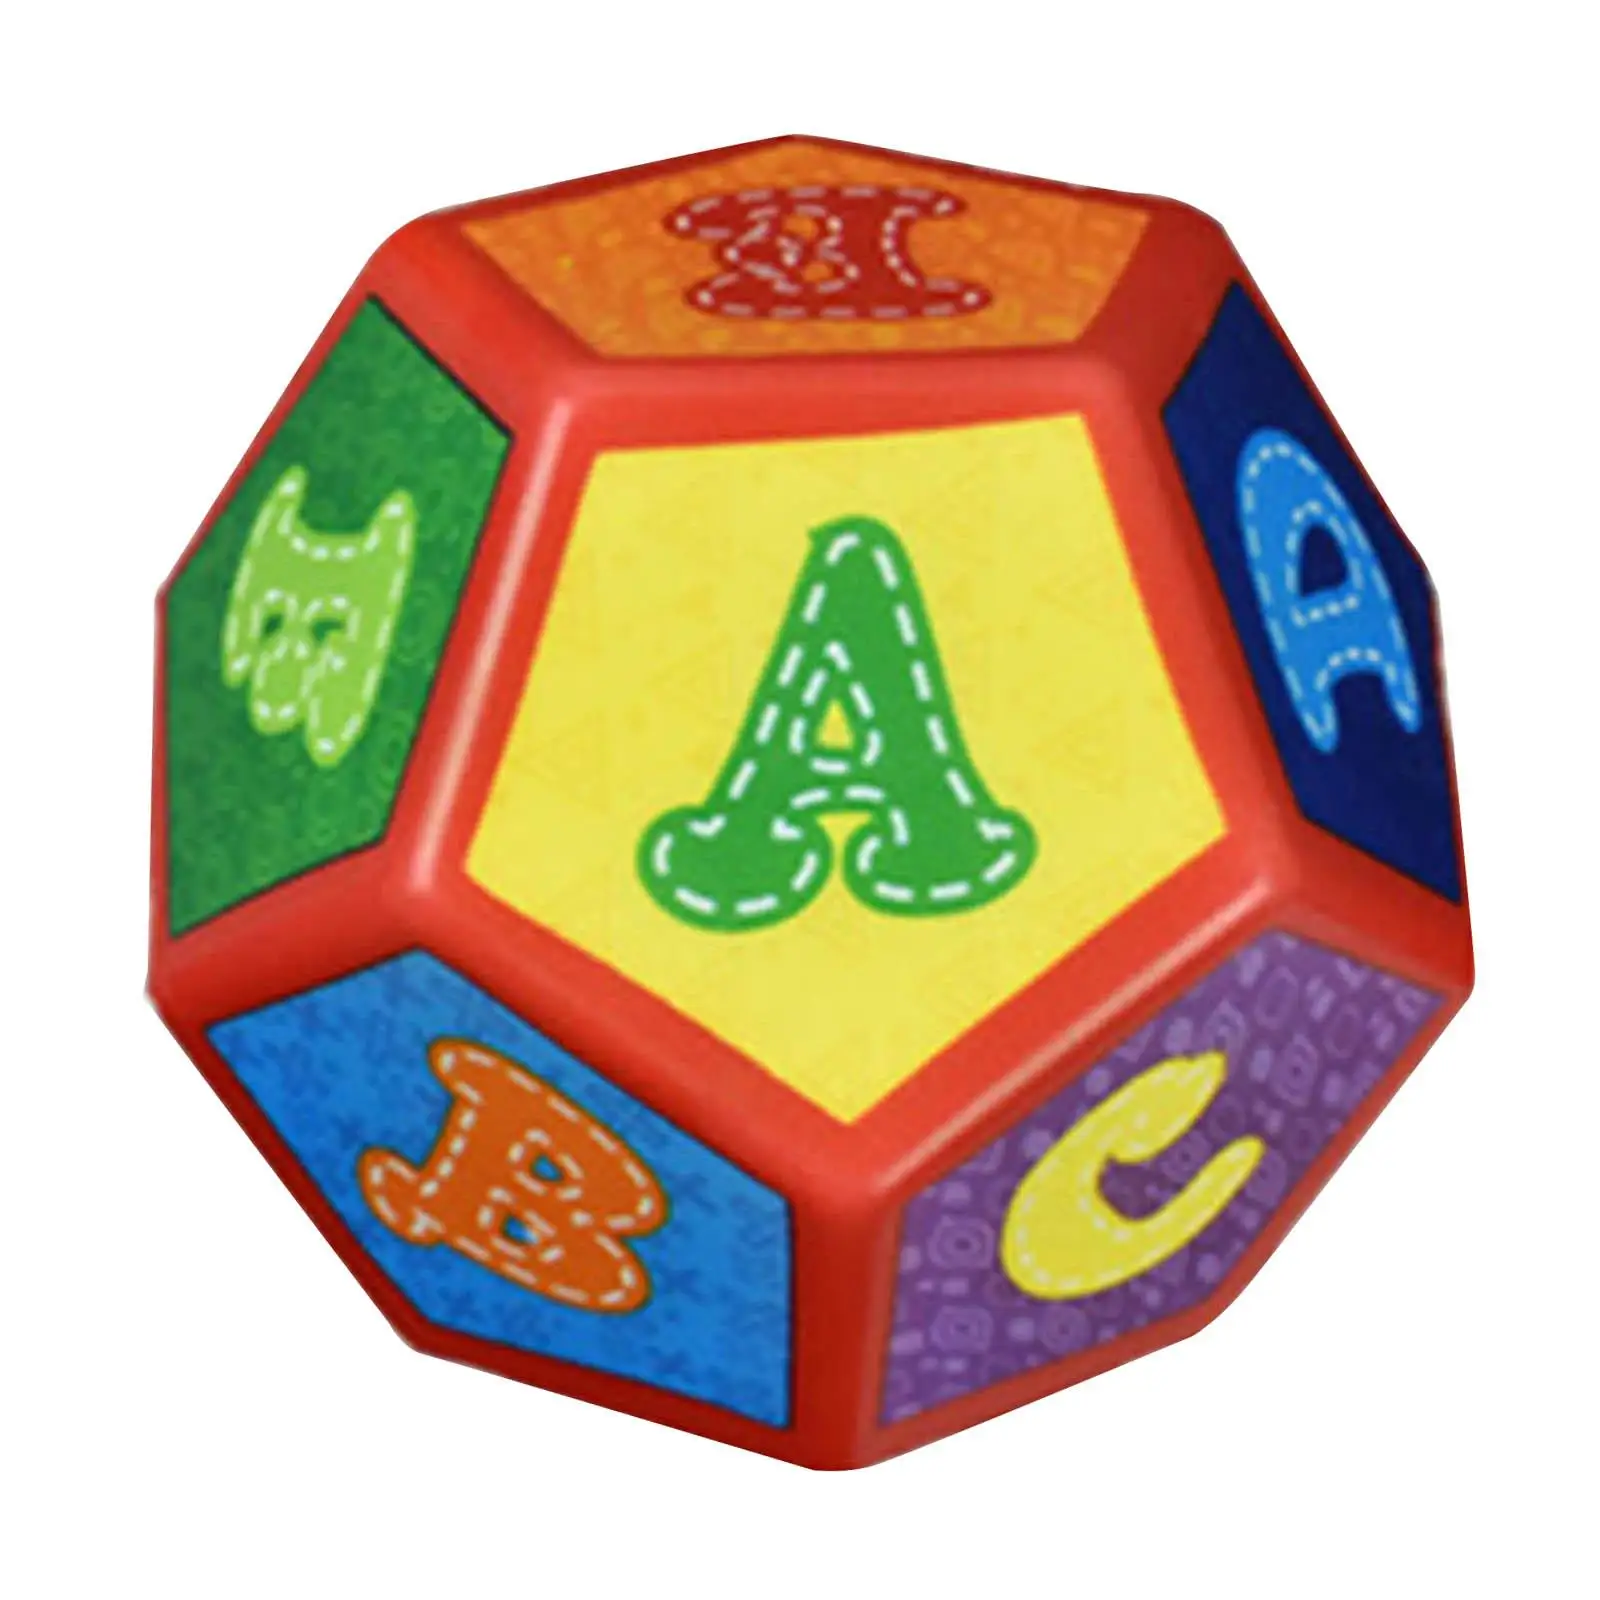 Kids 12 Sided Dice Educational Toys Game Props Lightweight Playing Learning Colorful Foam Die for Party Game Game Accessories